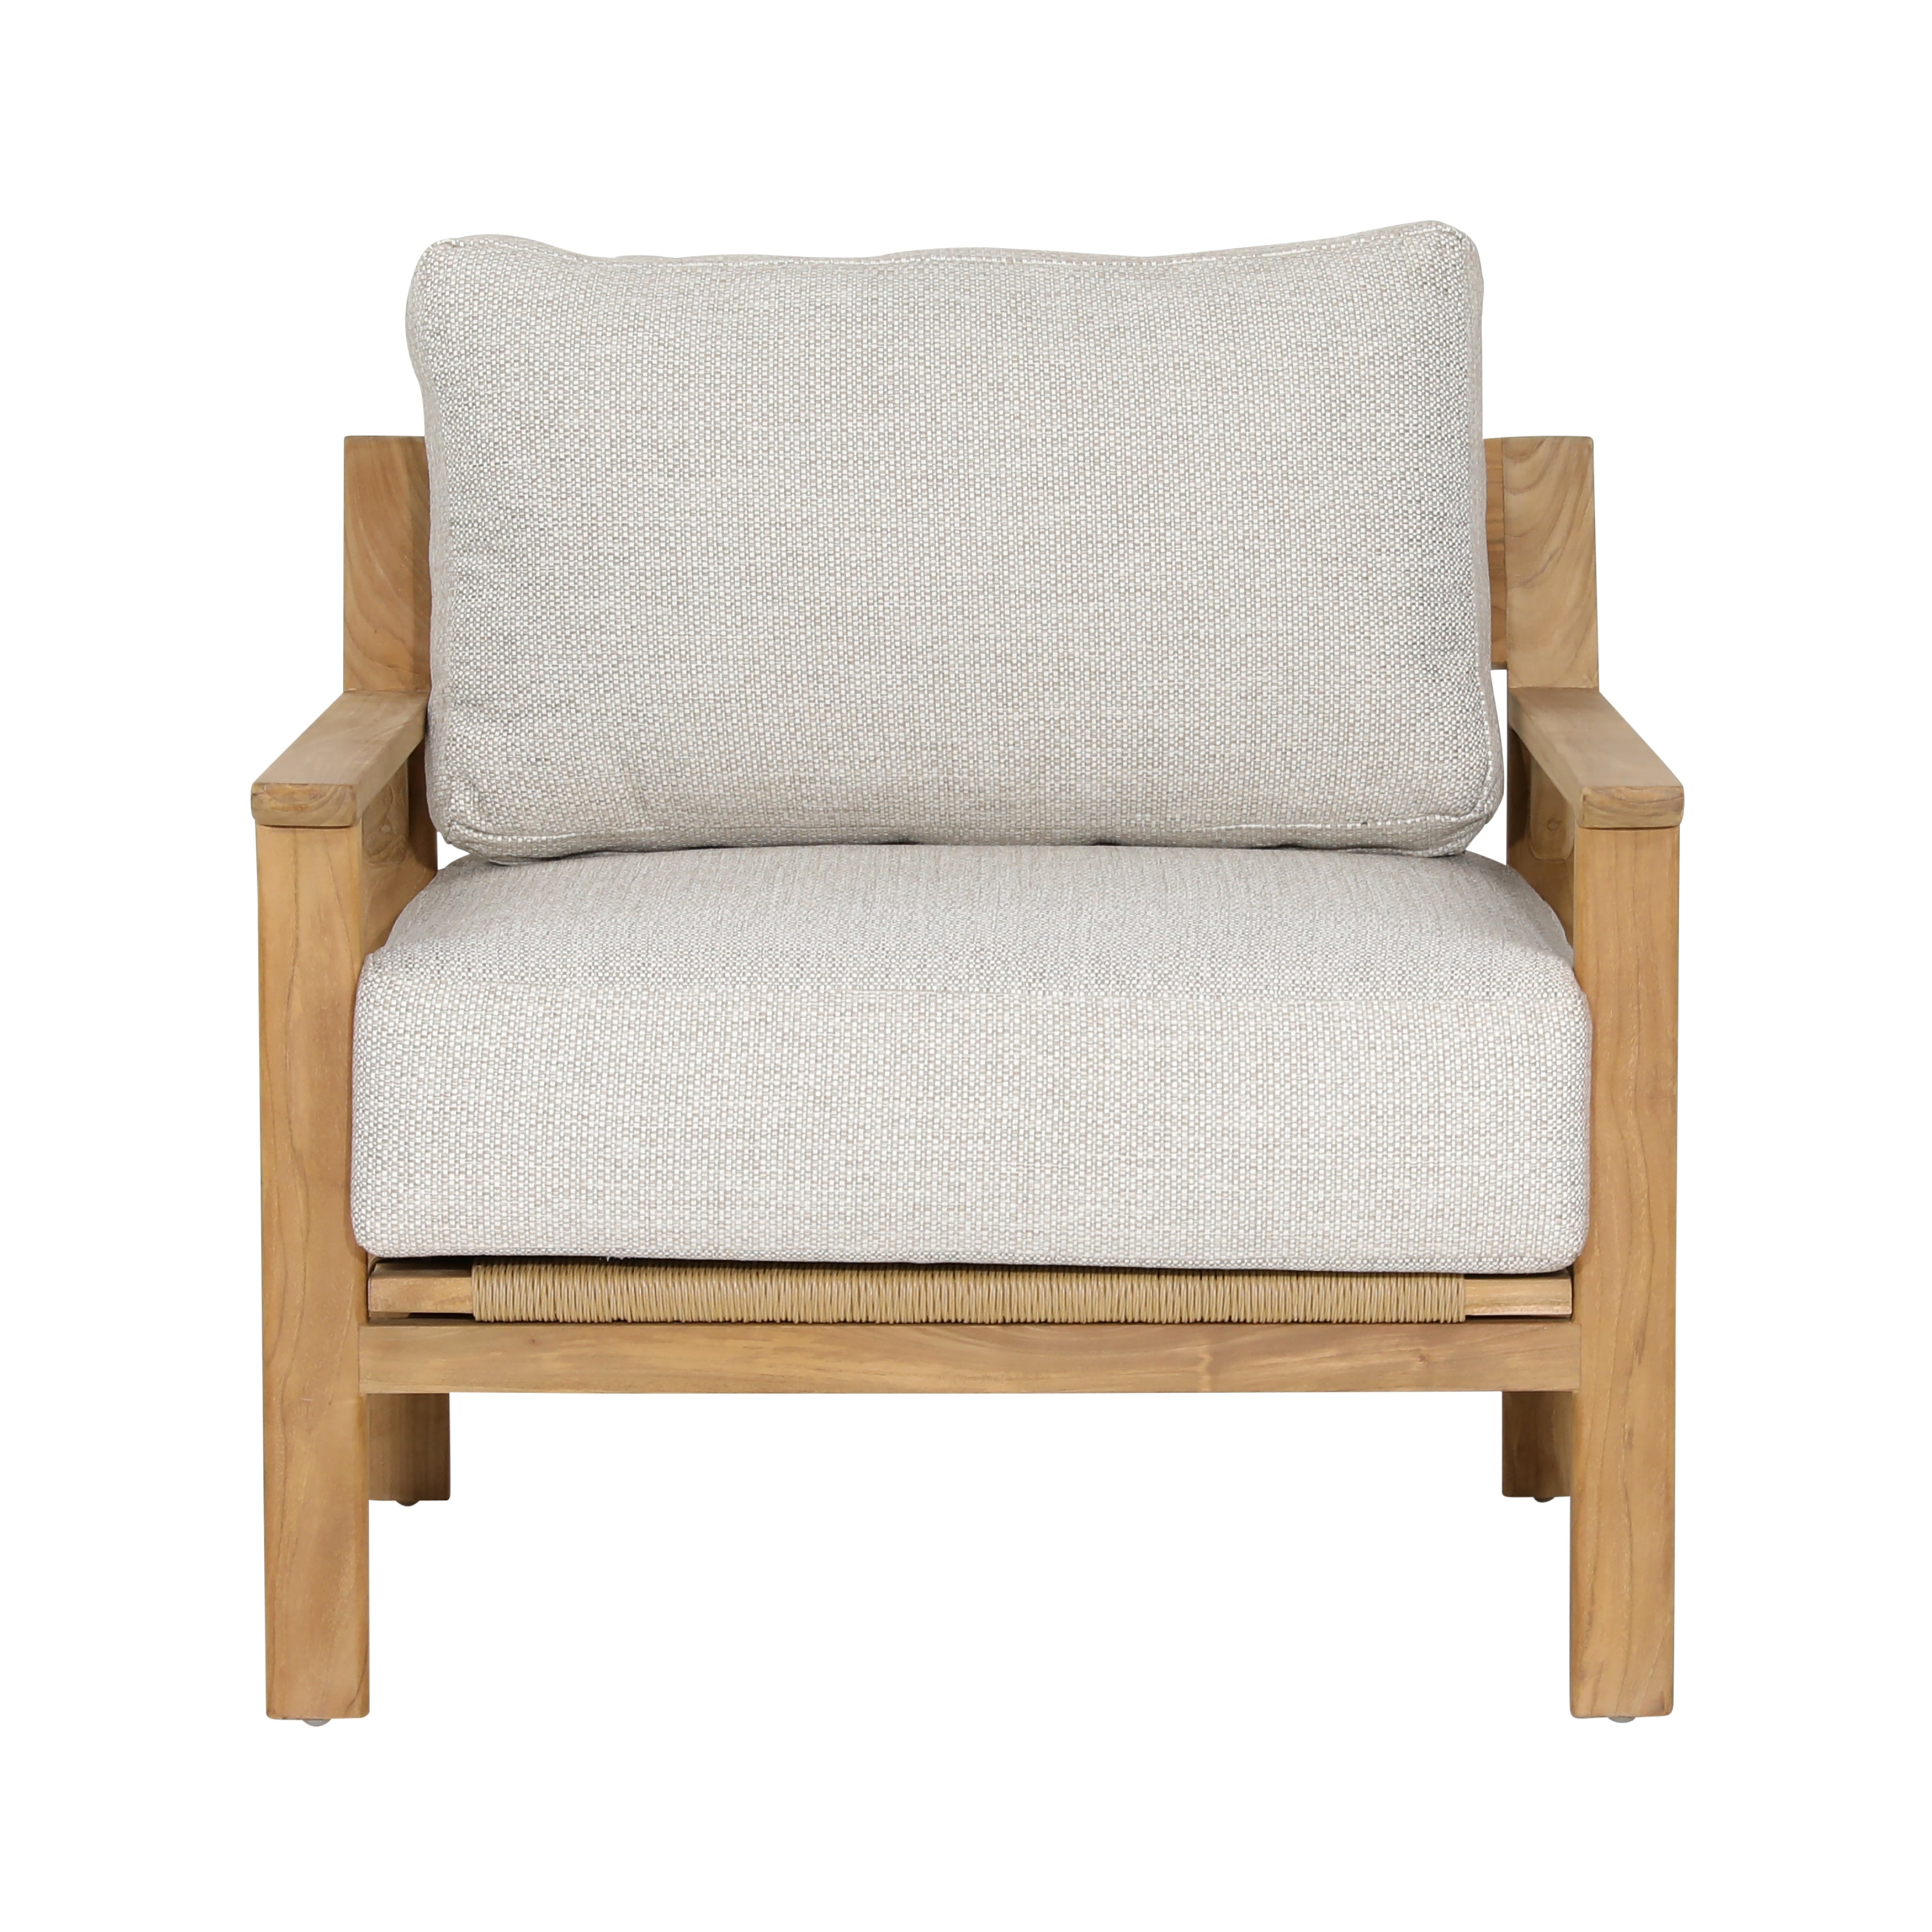 Lexy Outdoor Sofa Chair - What A Room